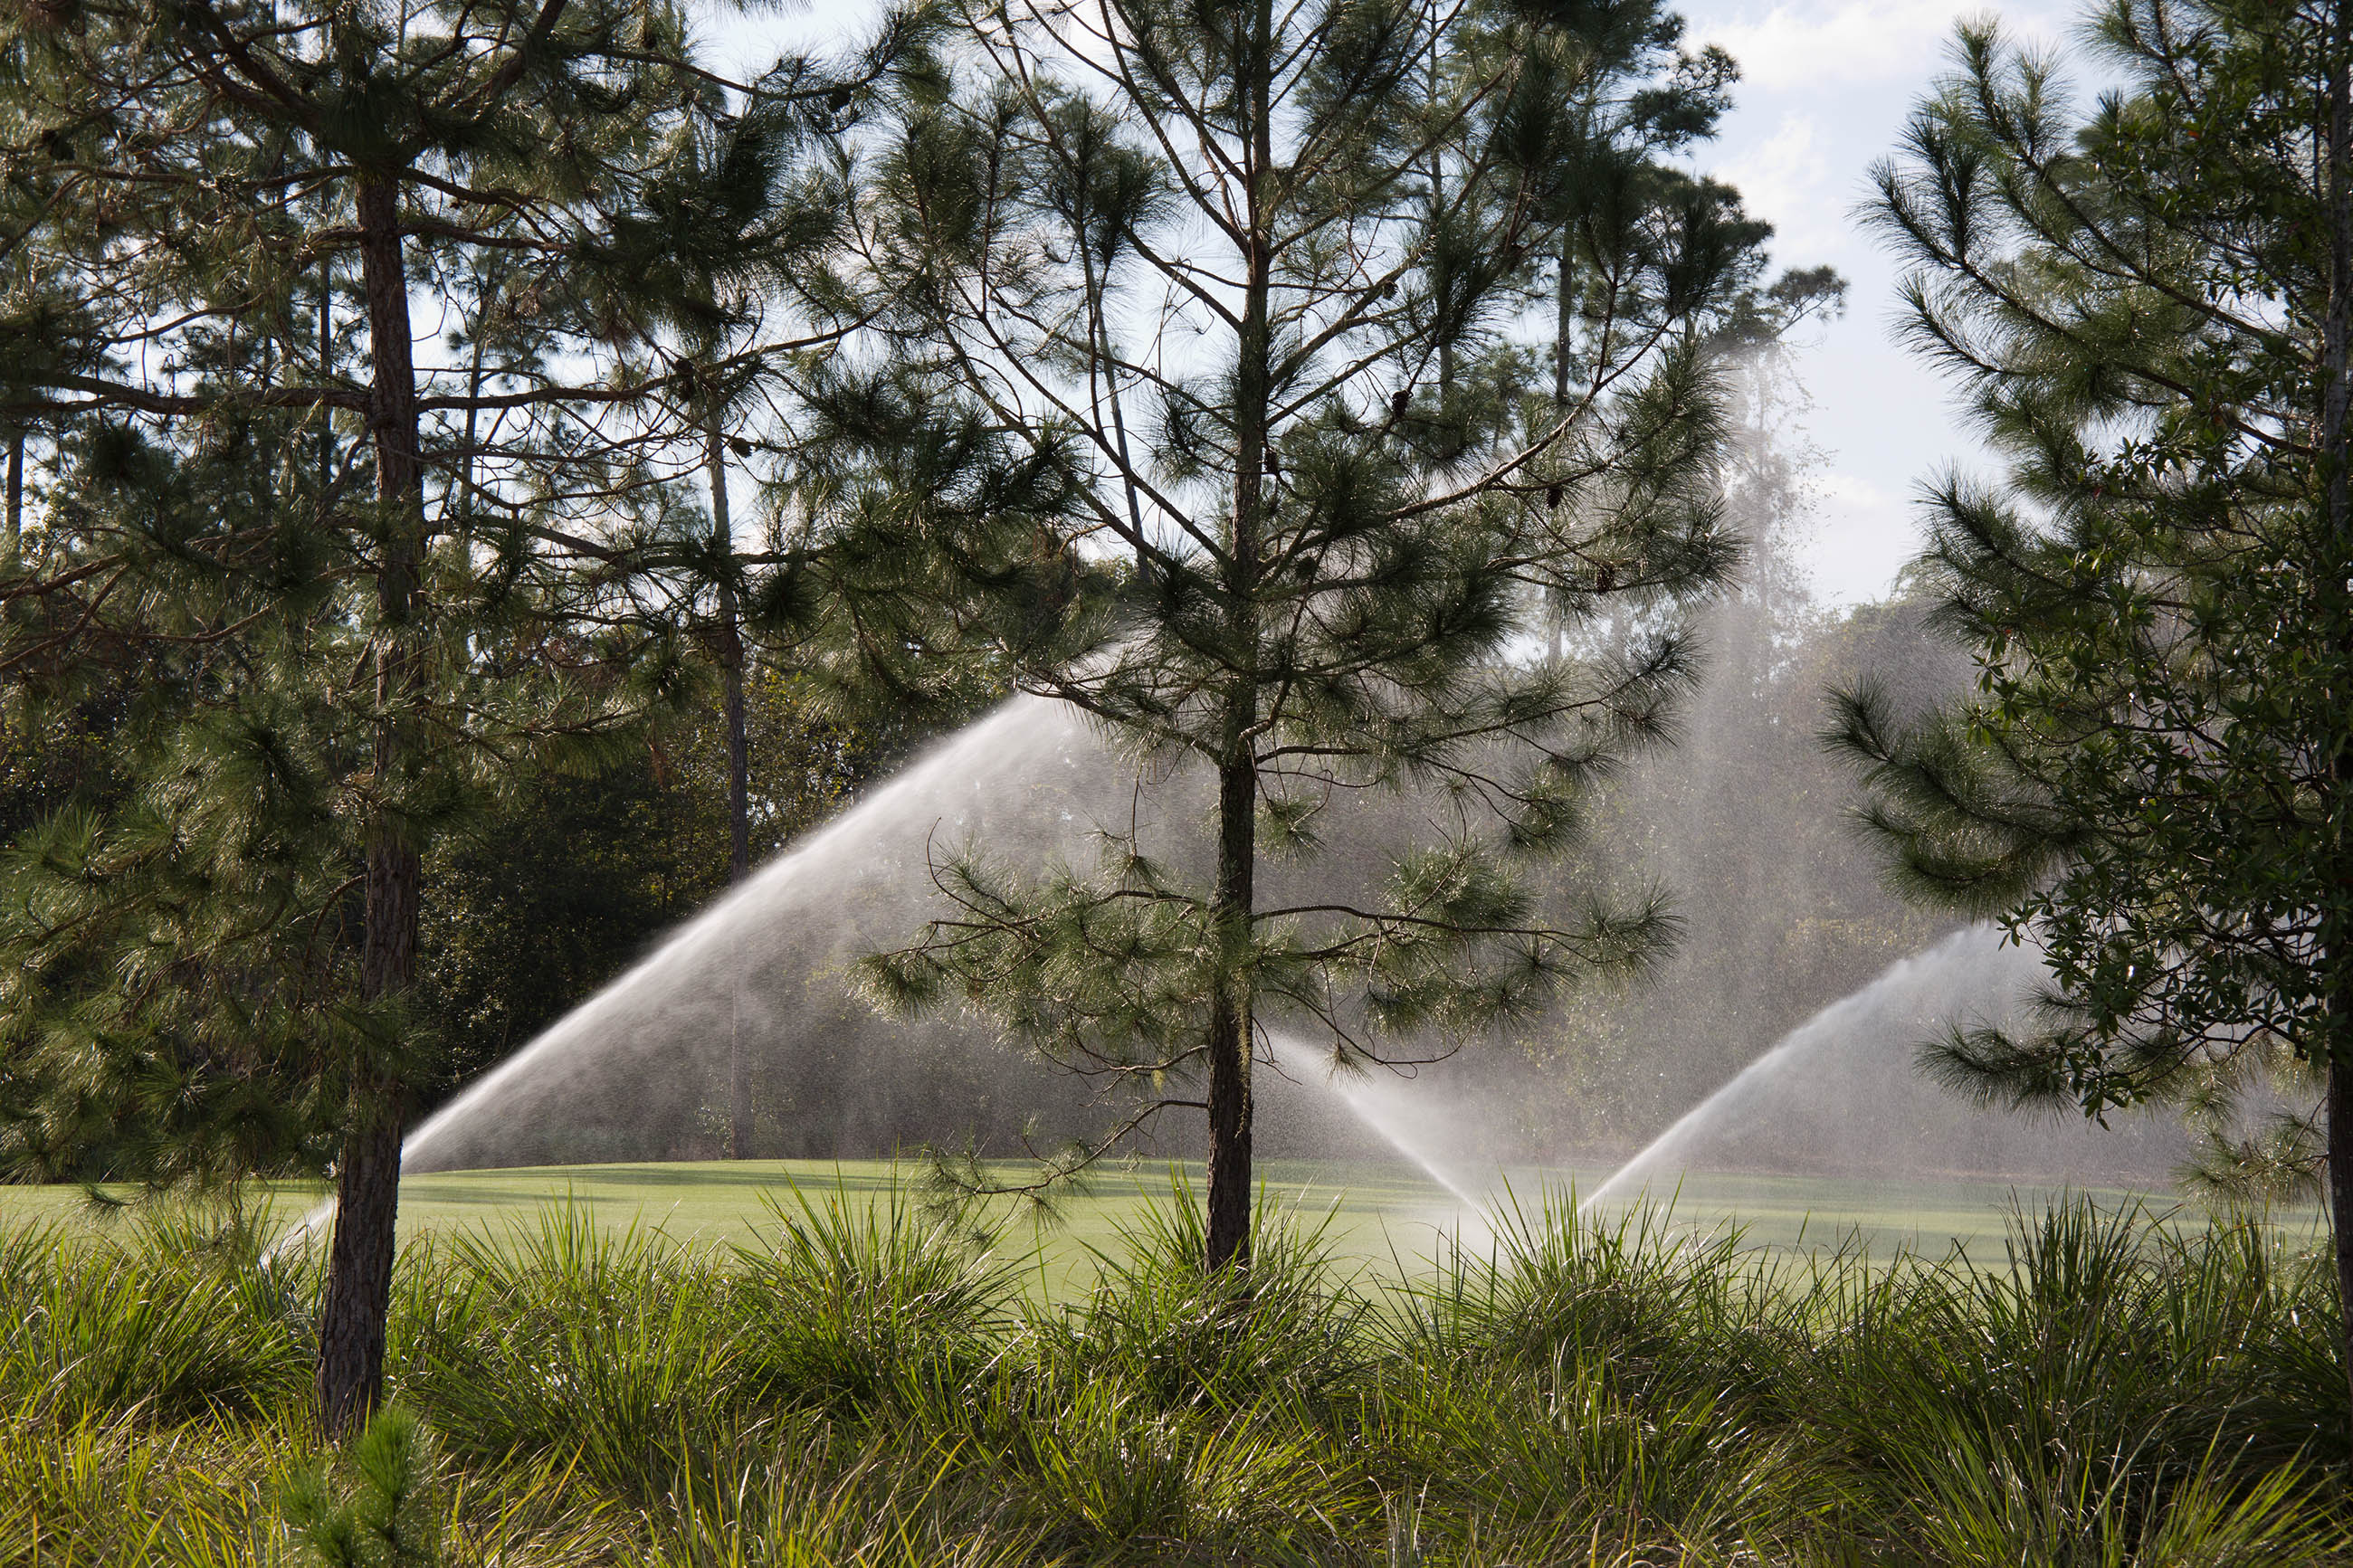 Sprinklers on a lawn with trees photo